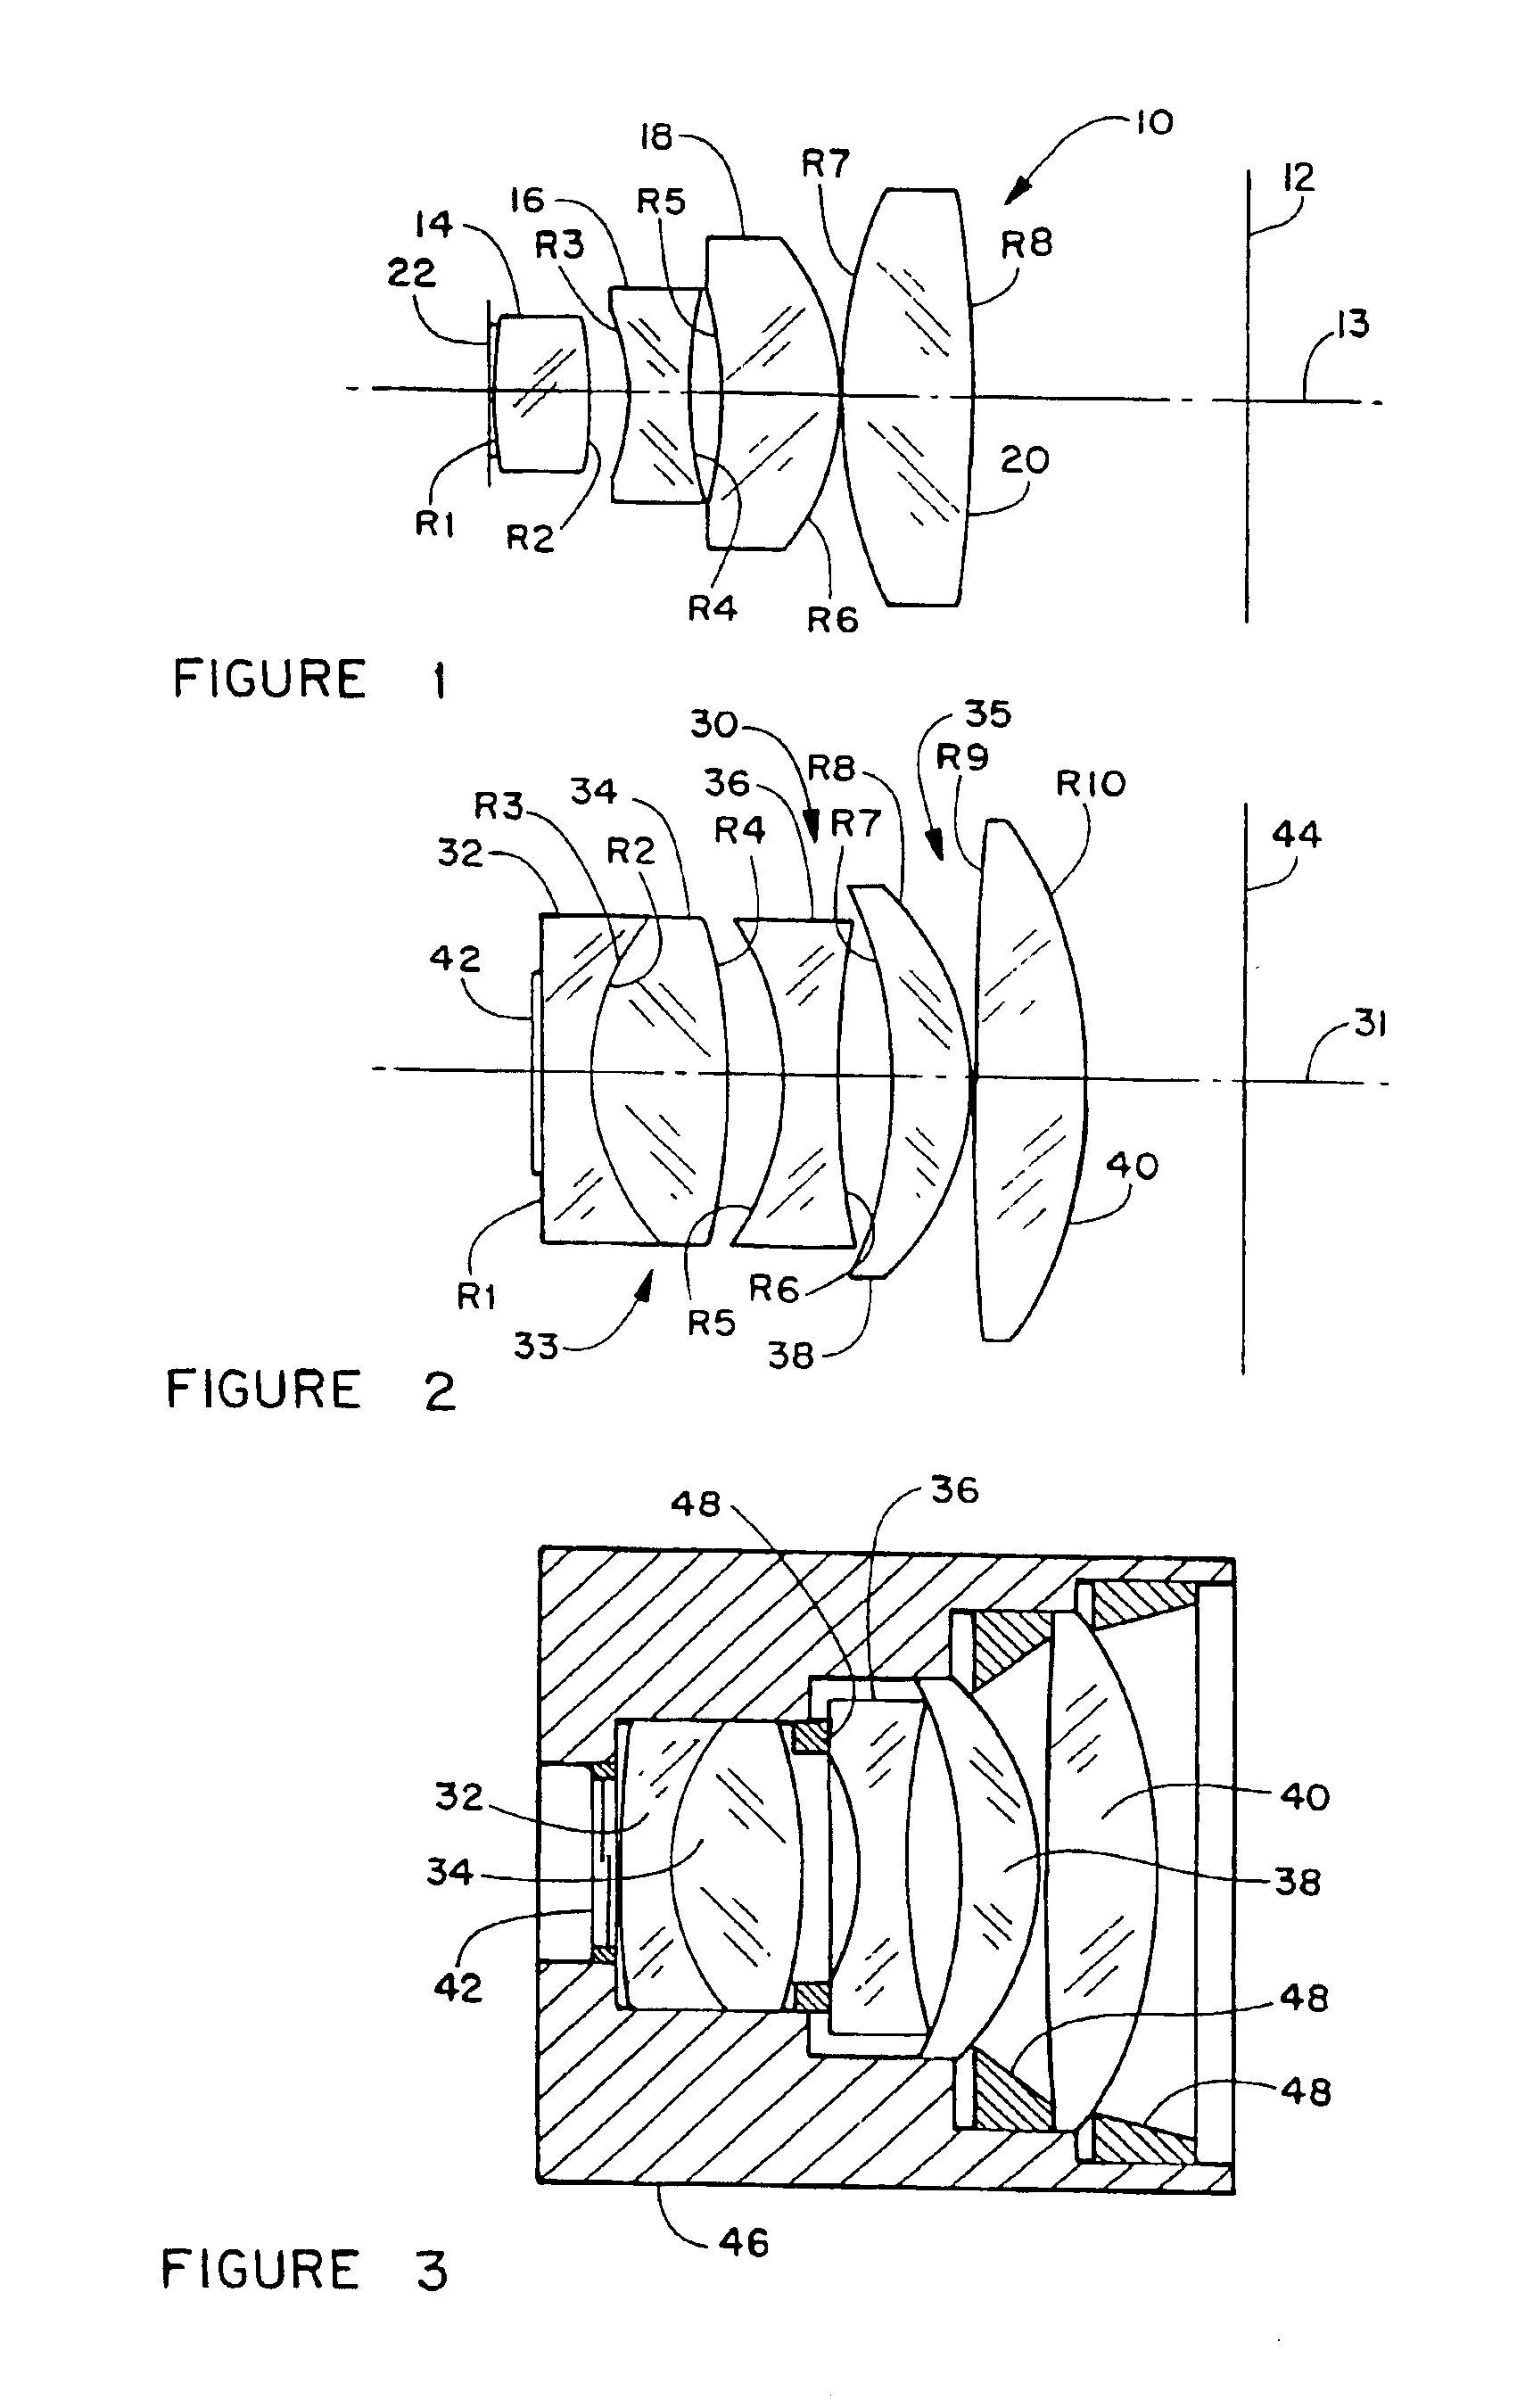 Lens with external aperture stop